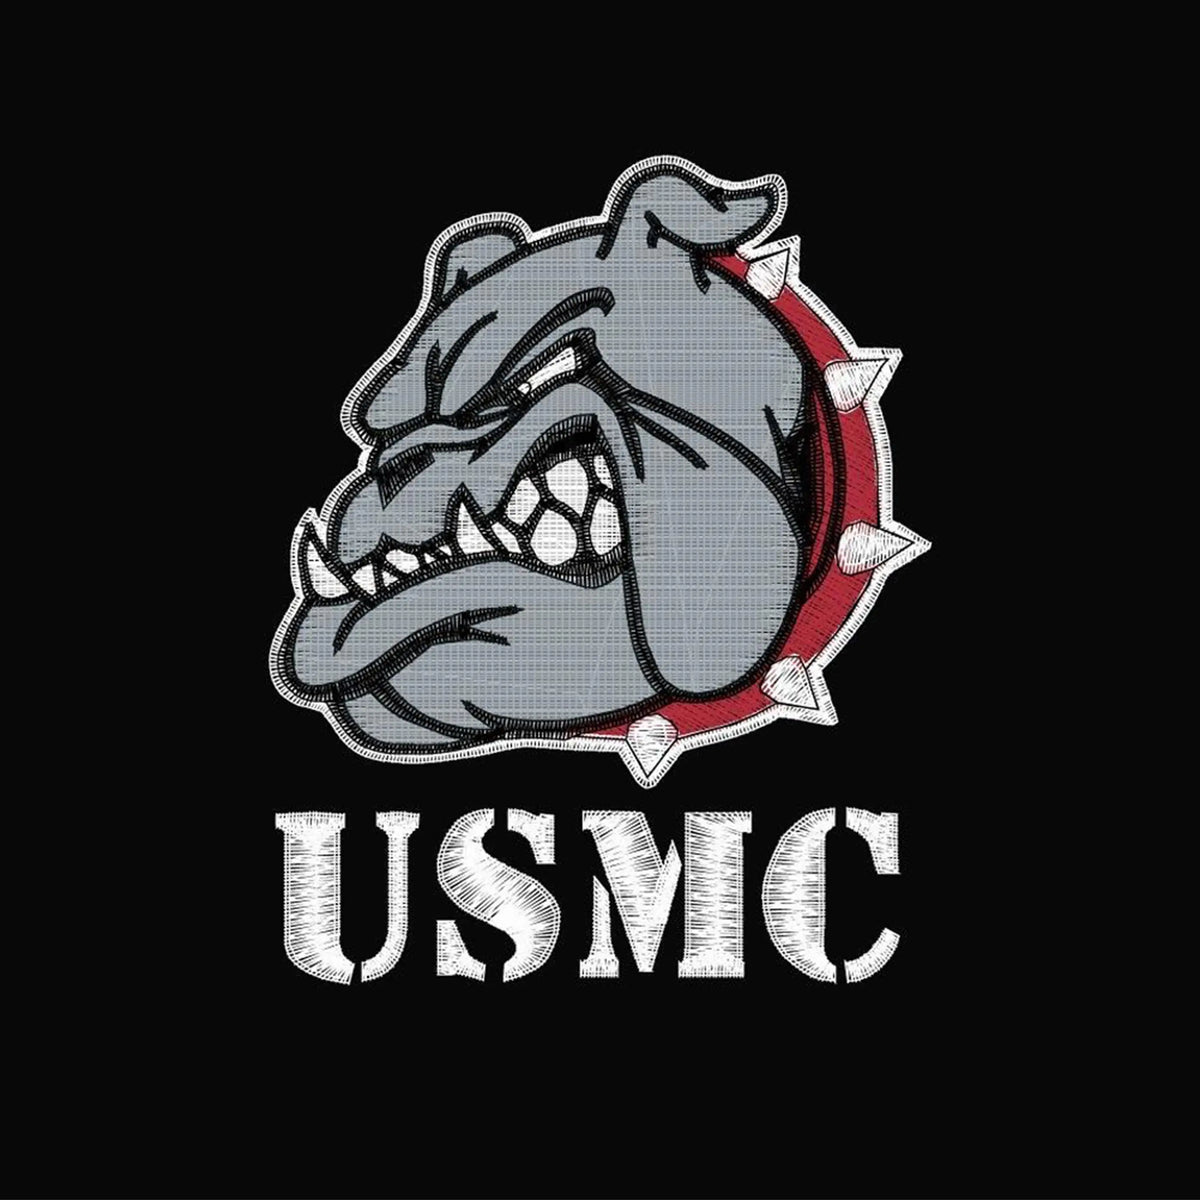 Under Armour Marines Bulldog Embroidered Tech Performance Polo